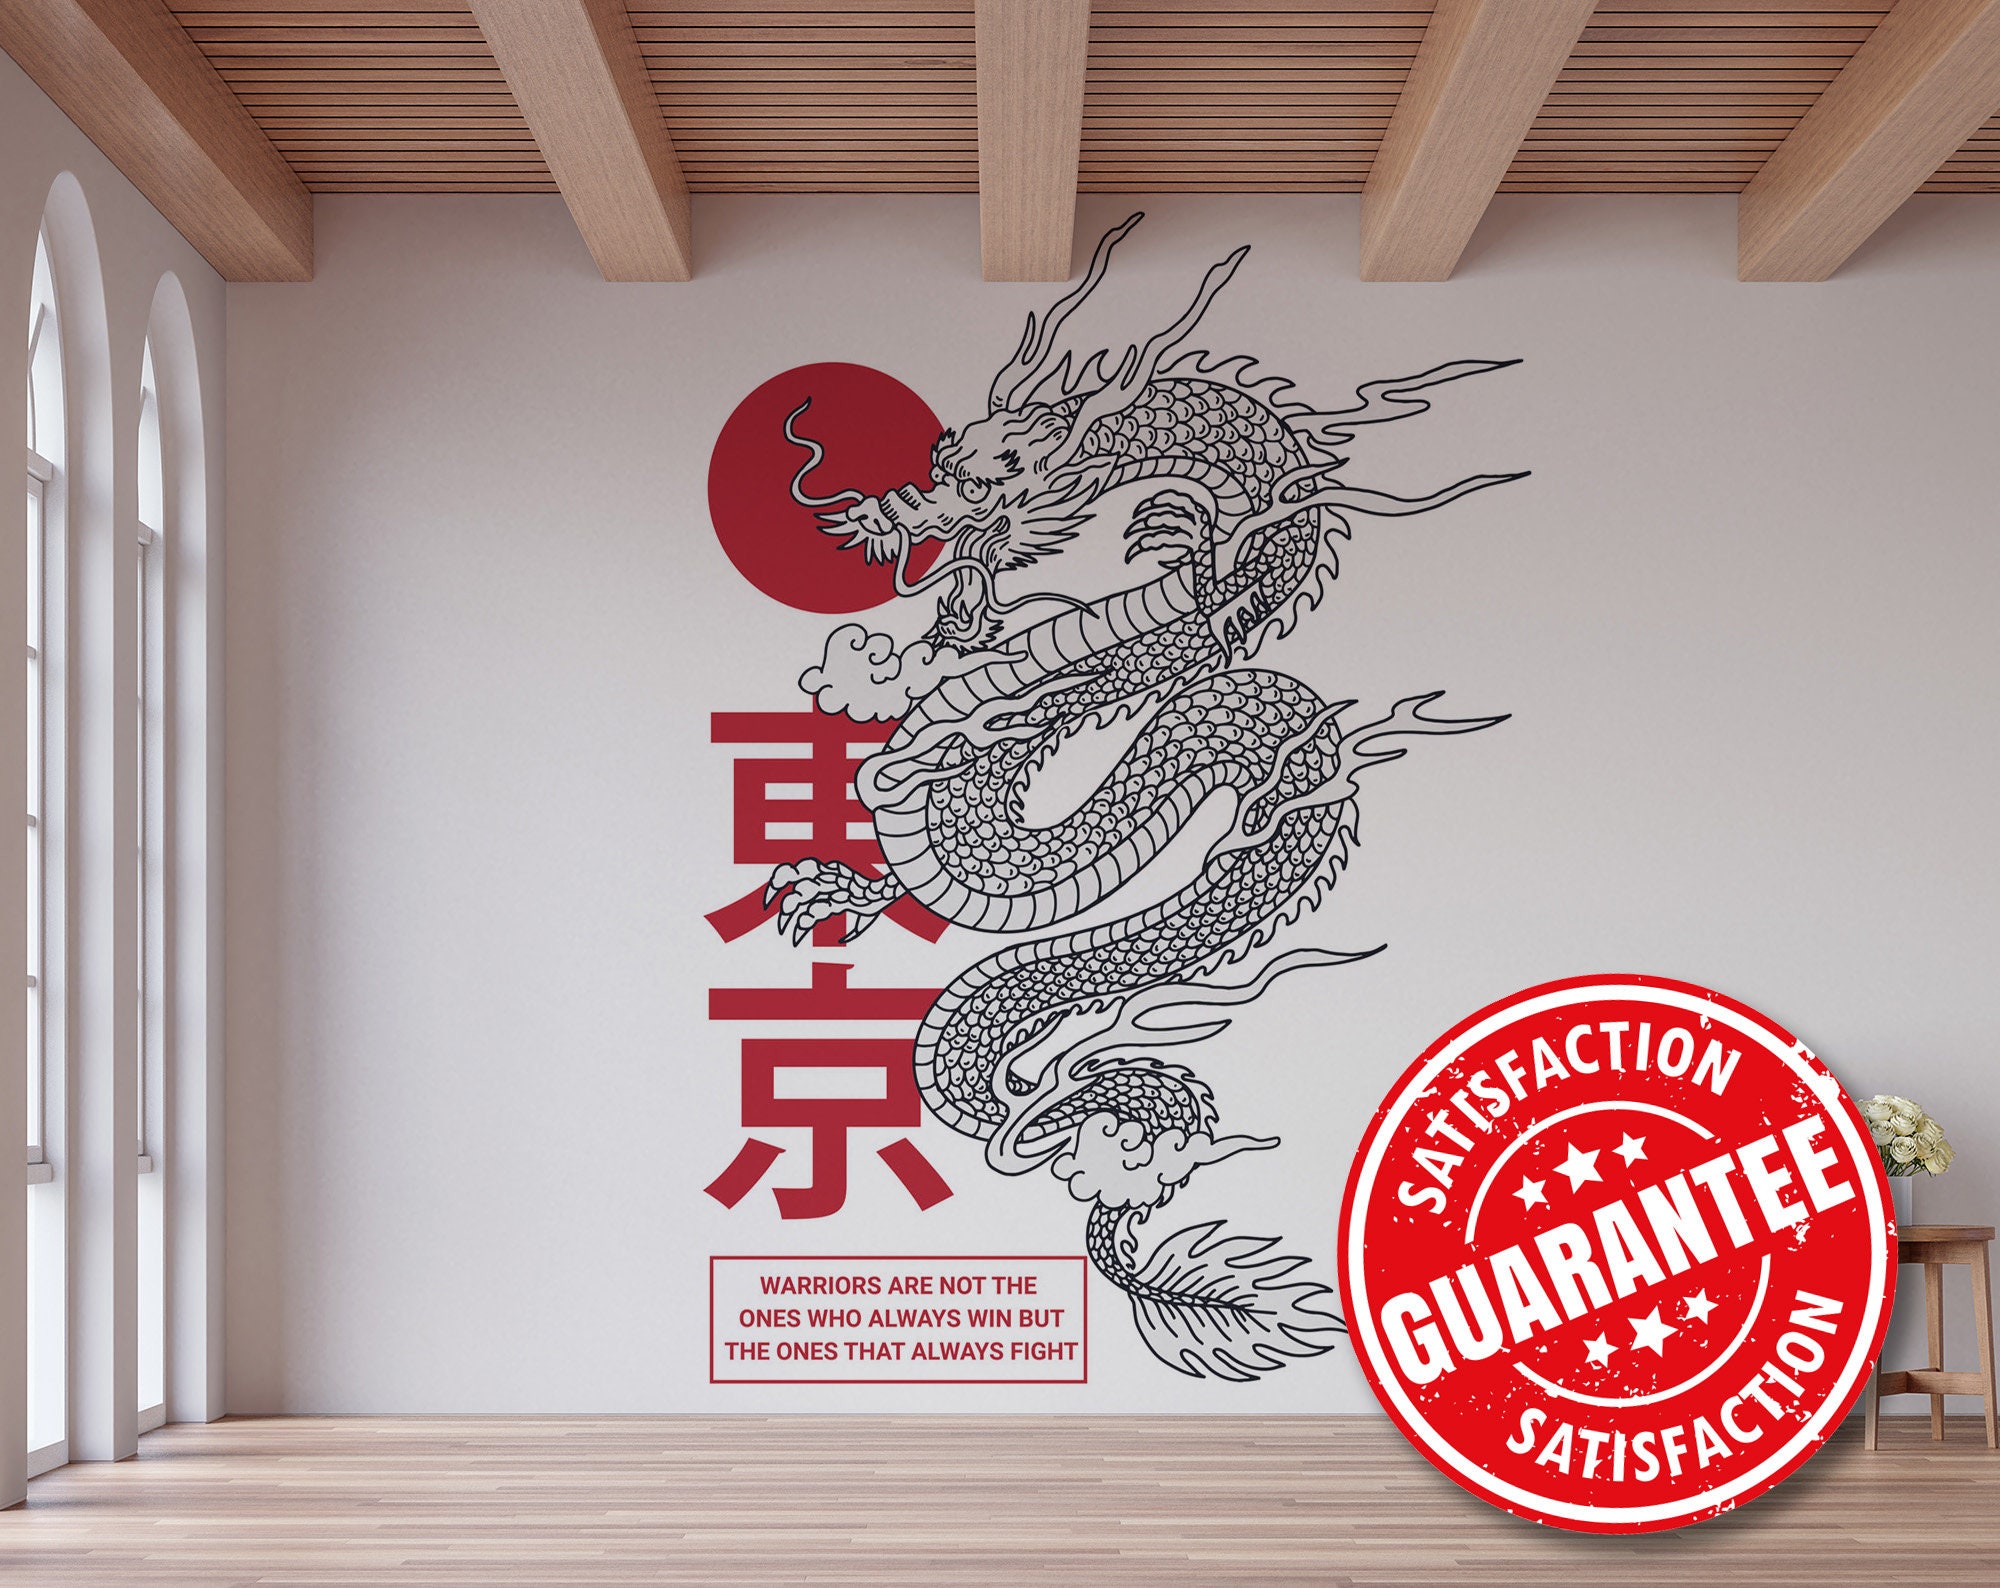 Japanese Dragon Wall Mural Wallpaper, Water Ukiyo-e Peel and Stick, Removable  Wall Art Poster, Self Adhesive Decor Made in the USA 